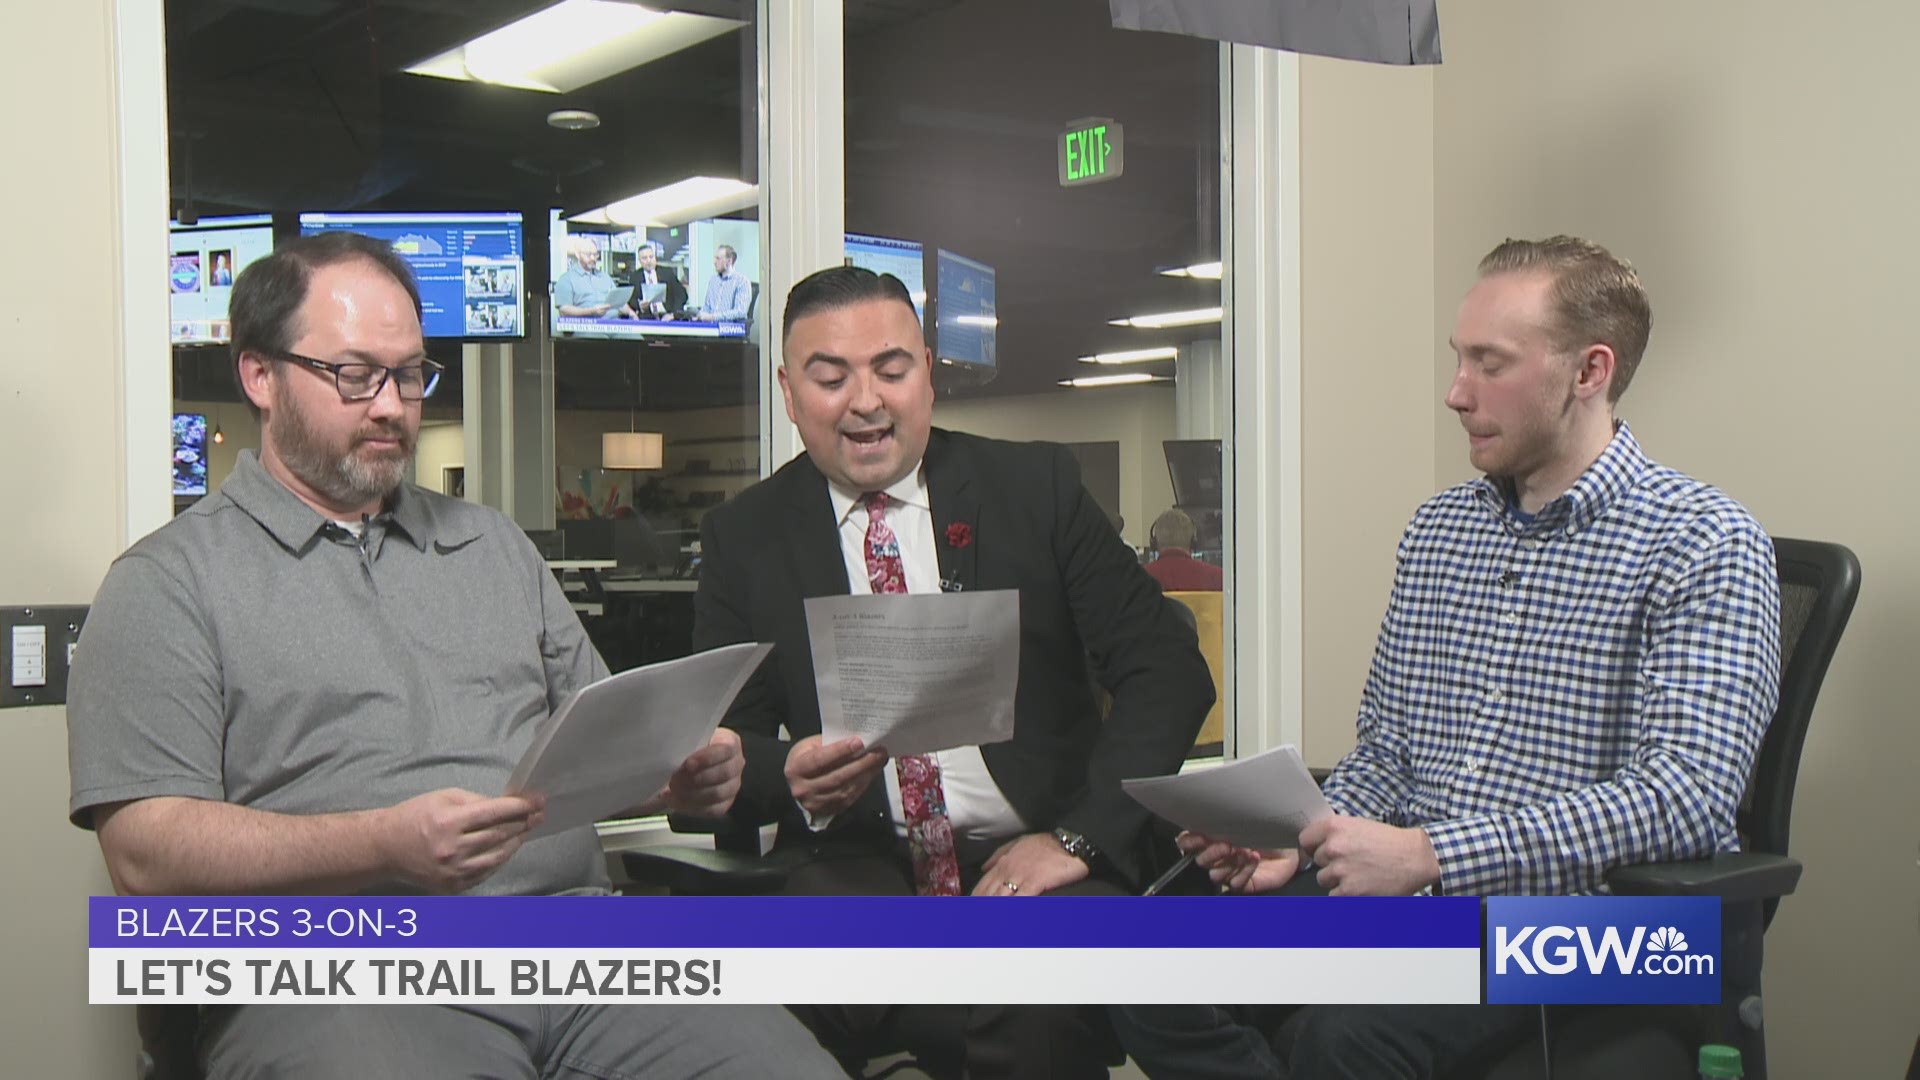 KGW's Jared Cowley, Orlando Sanchez and Nate Hanson predict the winner of the Blazers' next three games, against the Mavericks (16-32), Clippers (23-24) and Bulls (18-30).